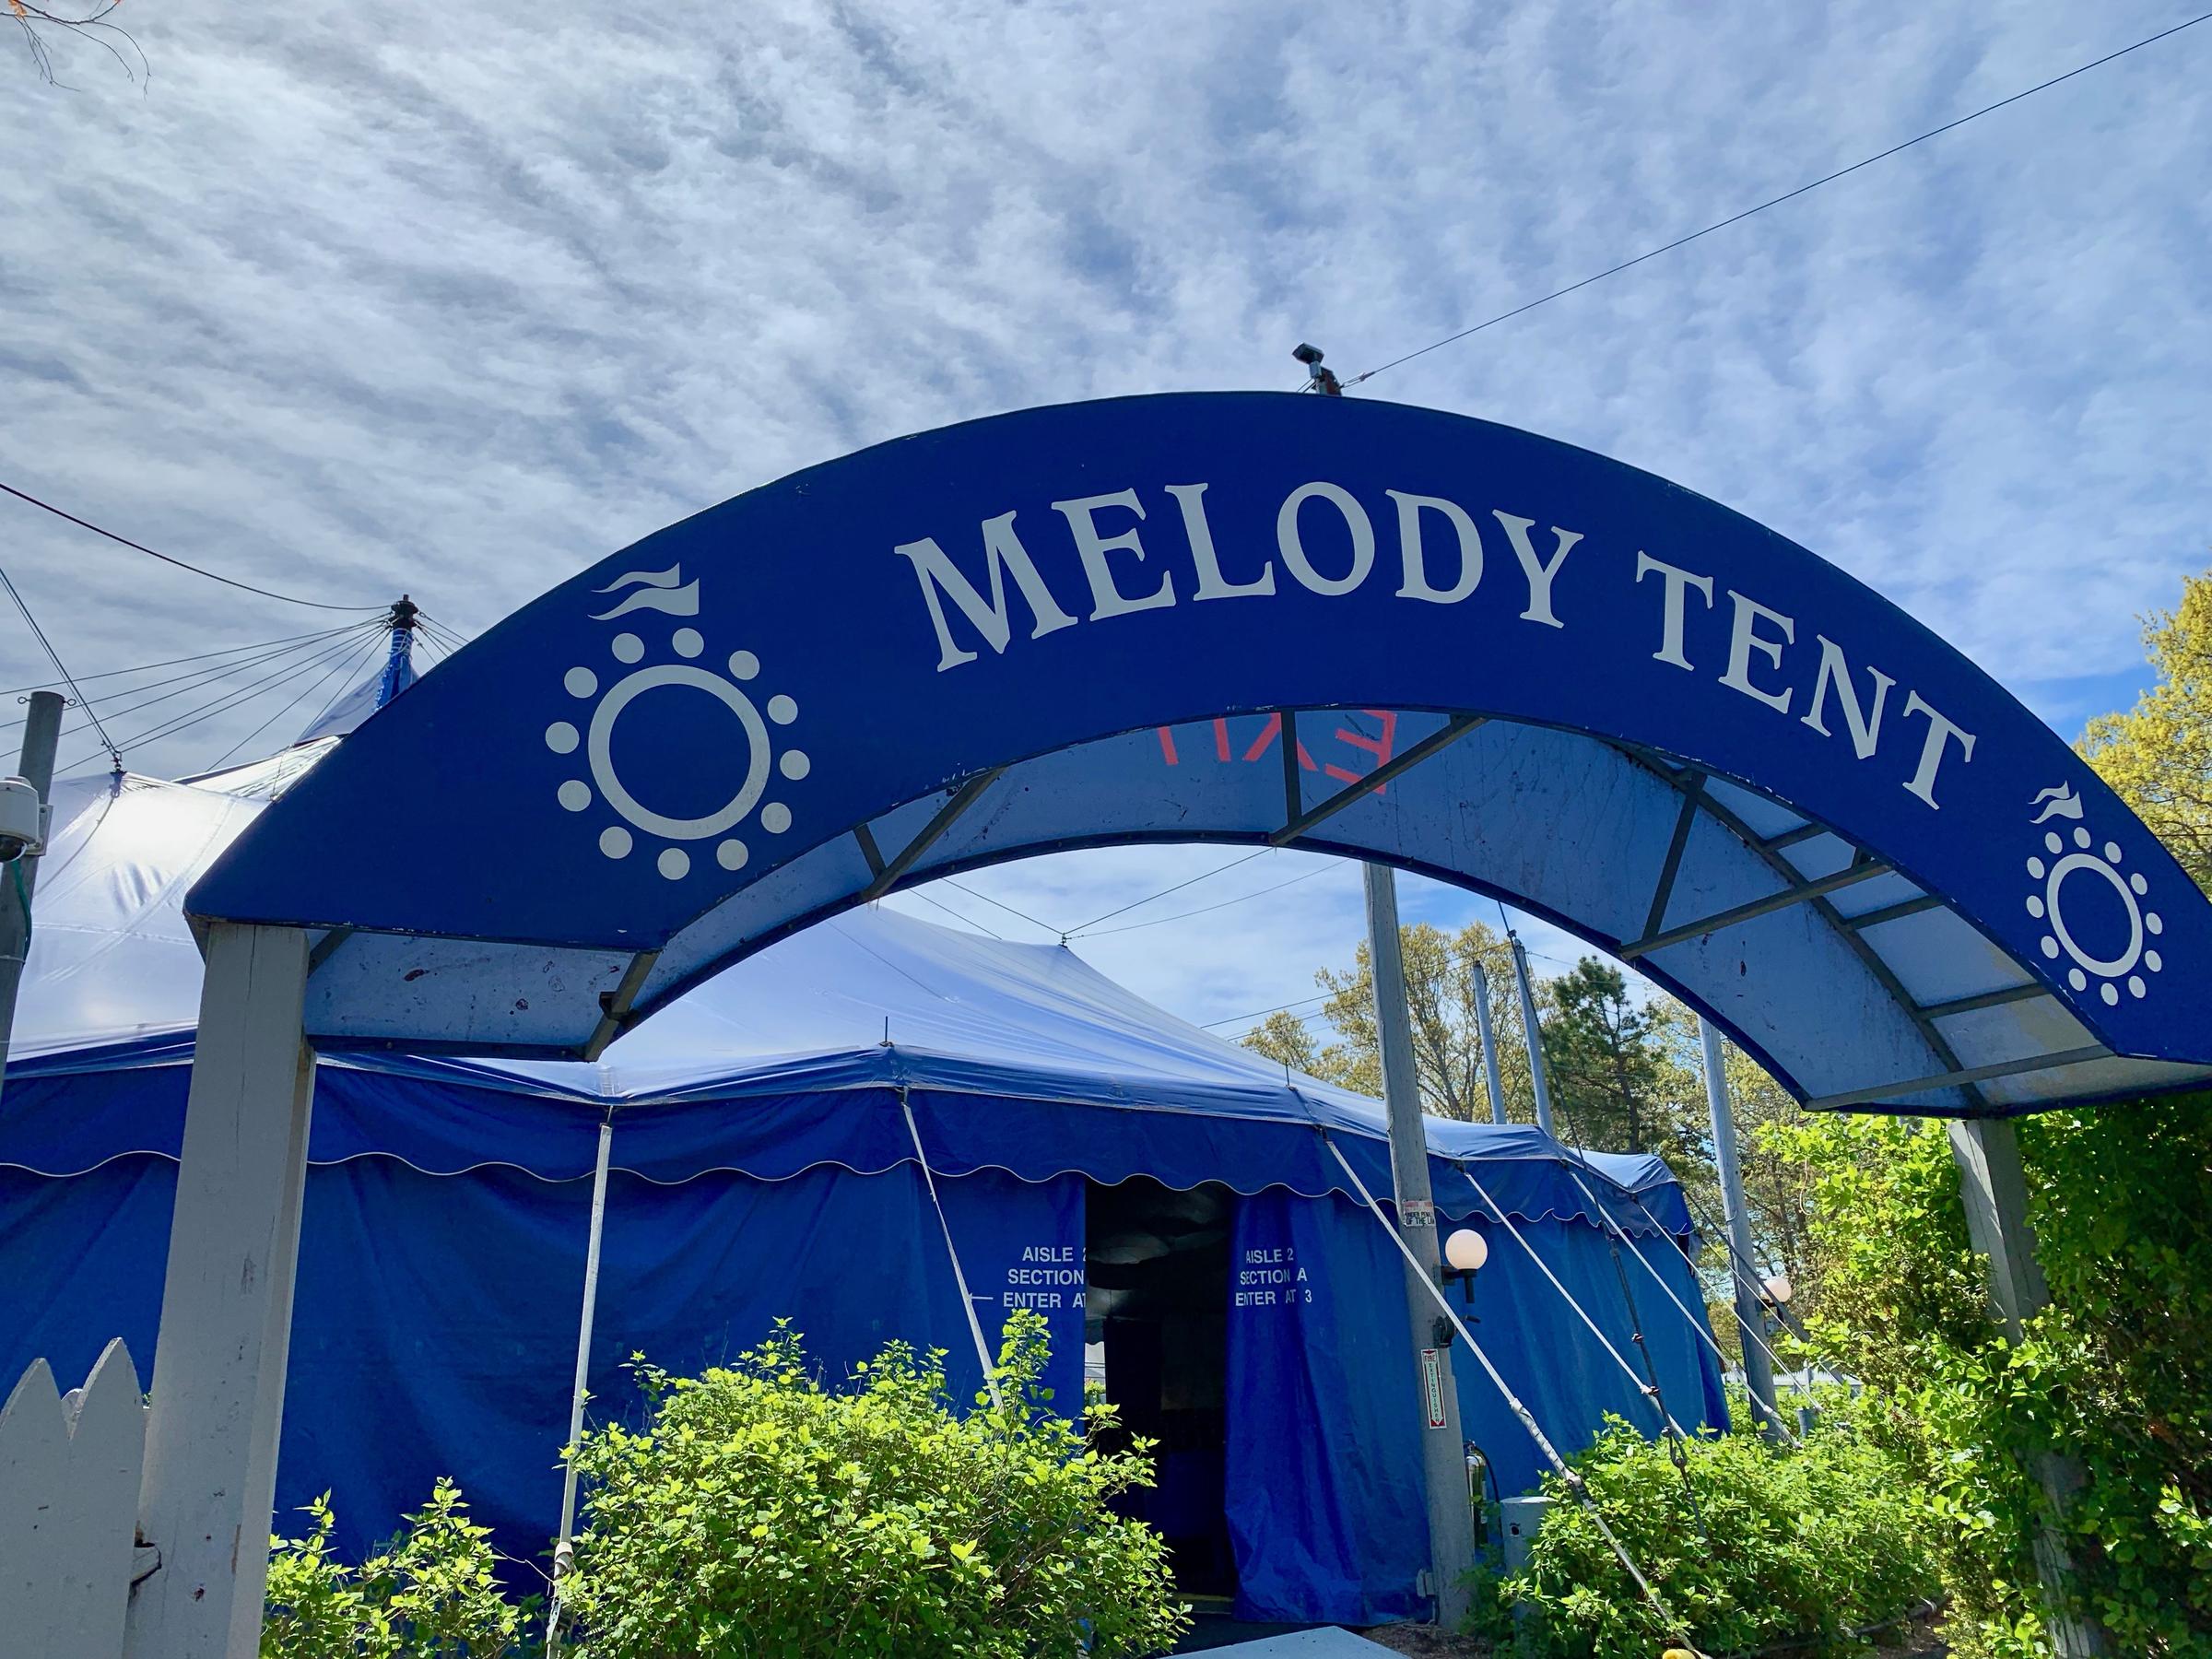 Cape Cod Melody Tent Seating Chart